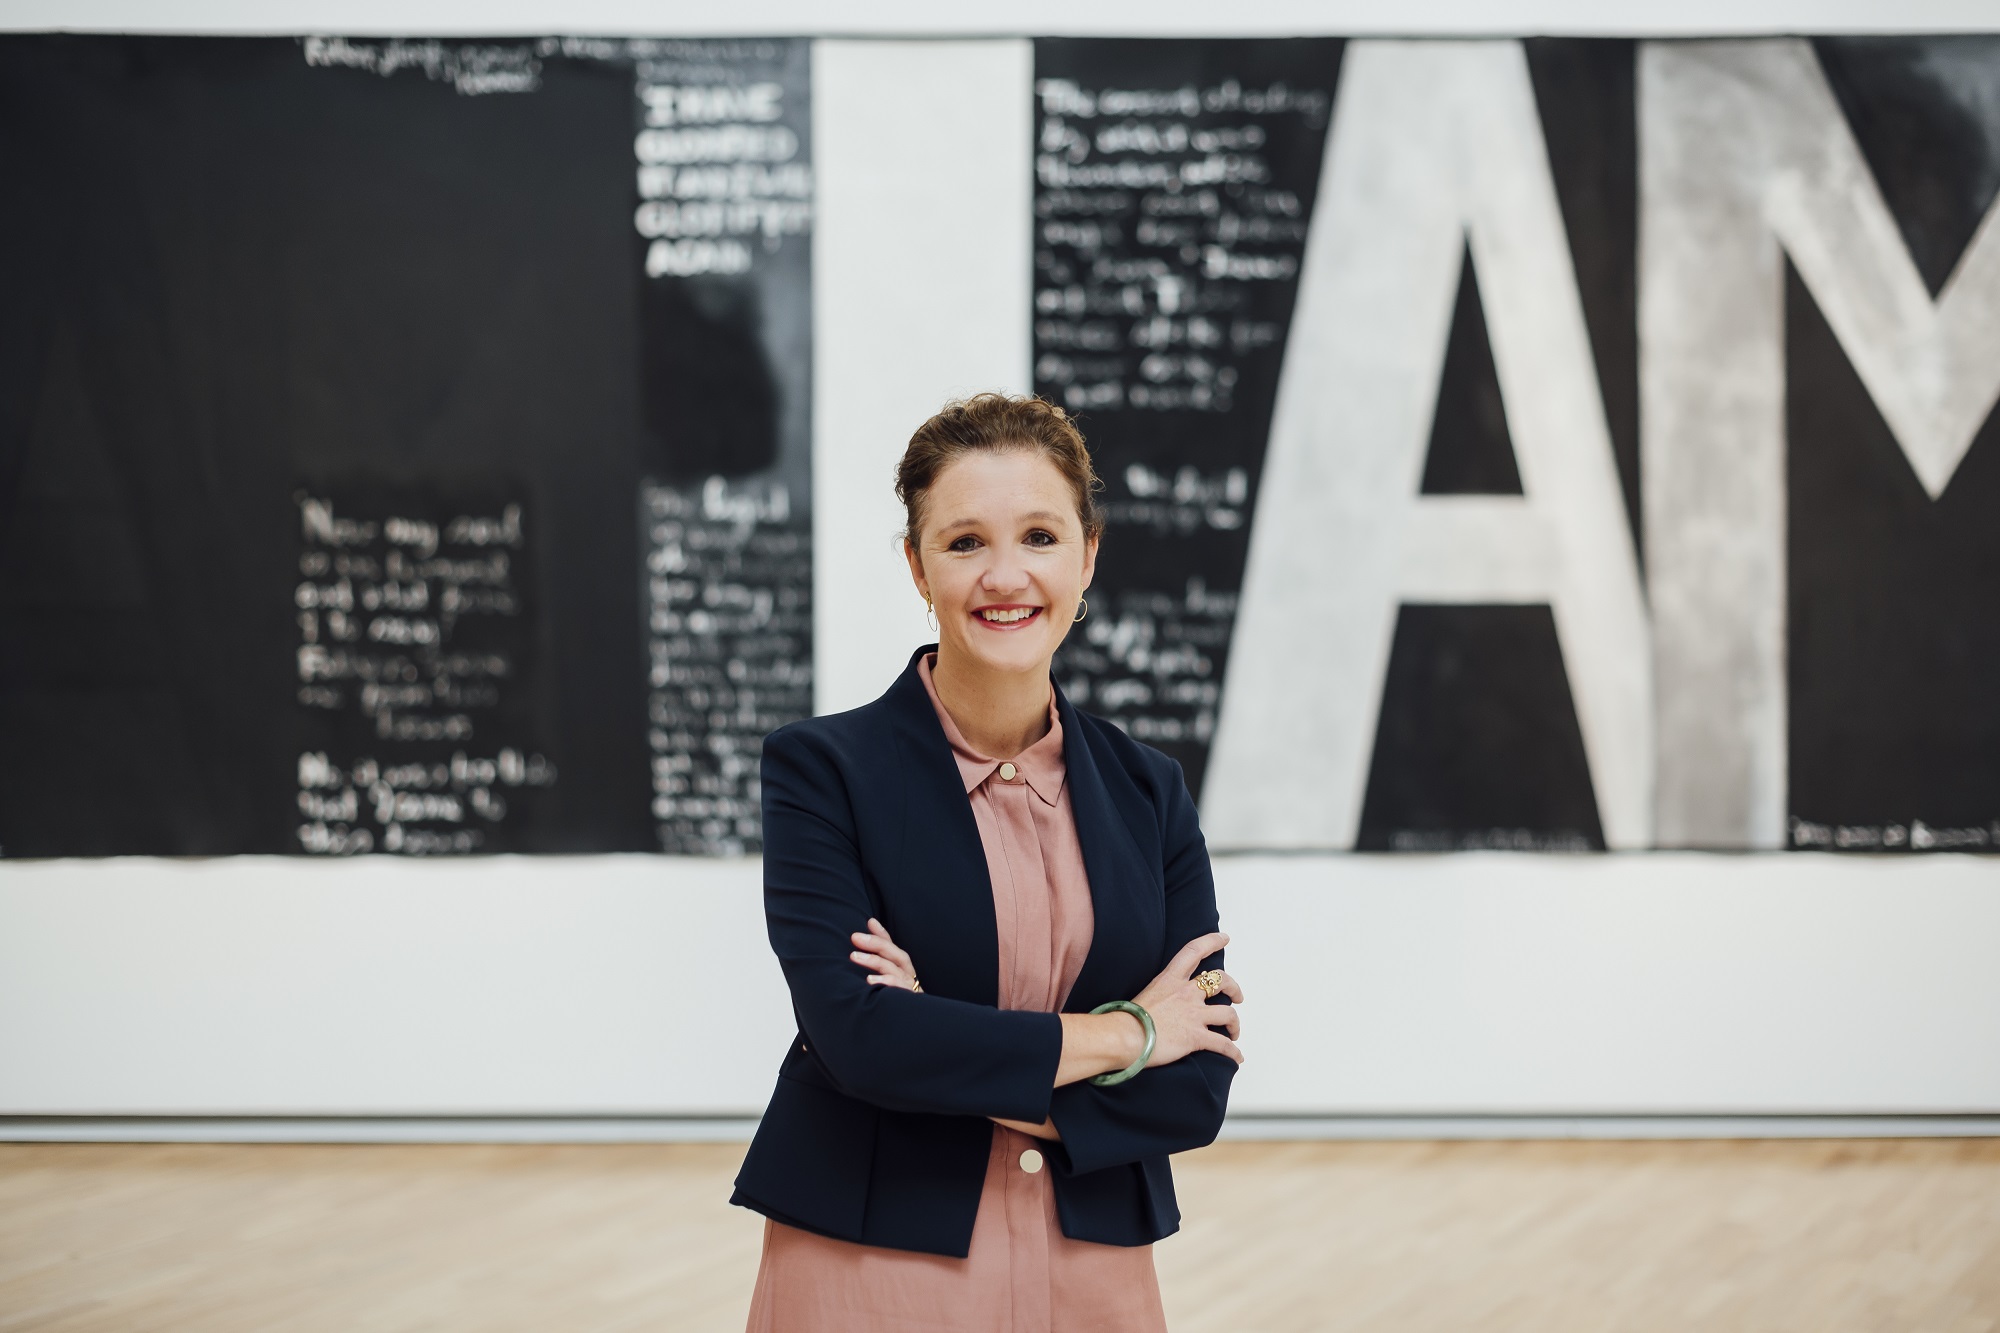 <p>Image: New Auckland Art Gallery Director Kirsten Paisley</p>

<p>Image Credit:&nbsp; Photography by Rohan Thomson. Artwork shown in background: <strong>Colin McCahon</strong>,<em> Victory over death 2</em>, 1970, National Gallery of Australia. Gift of the New Zealand Government 1978</p>